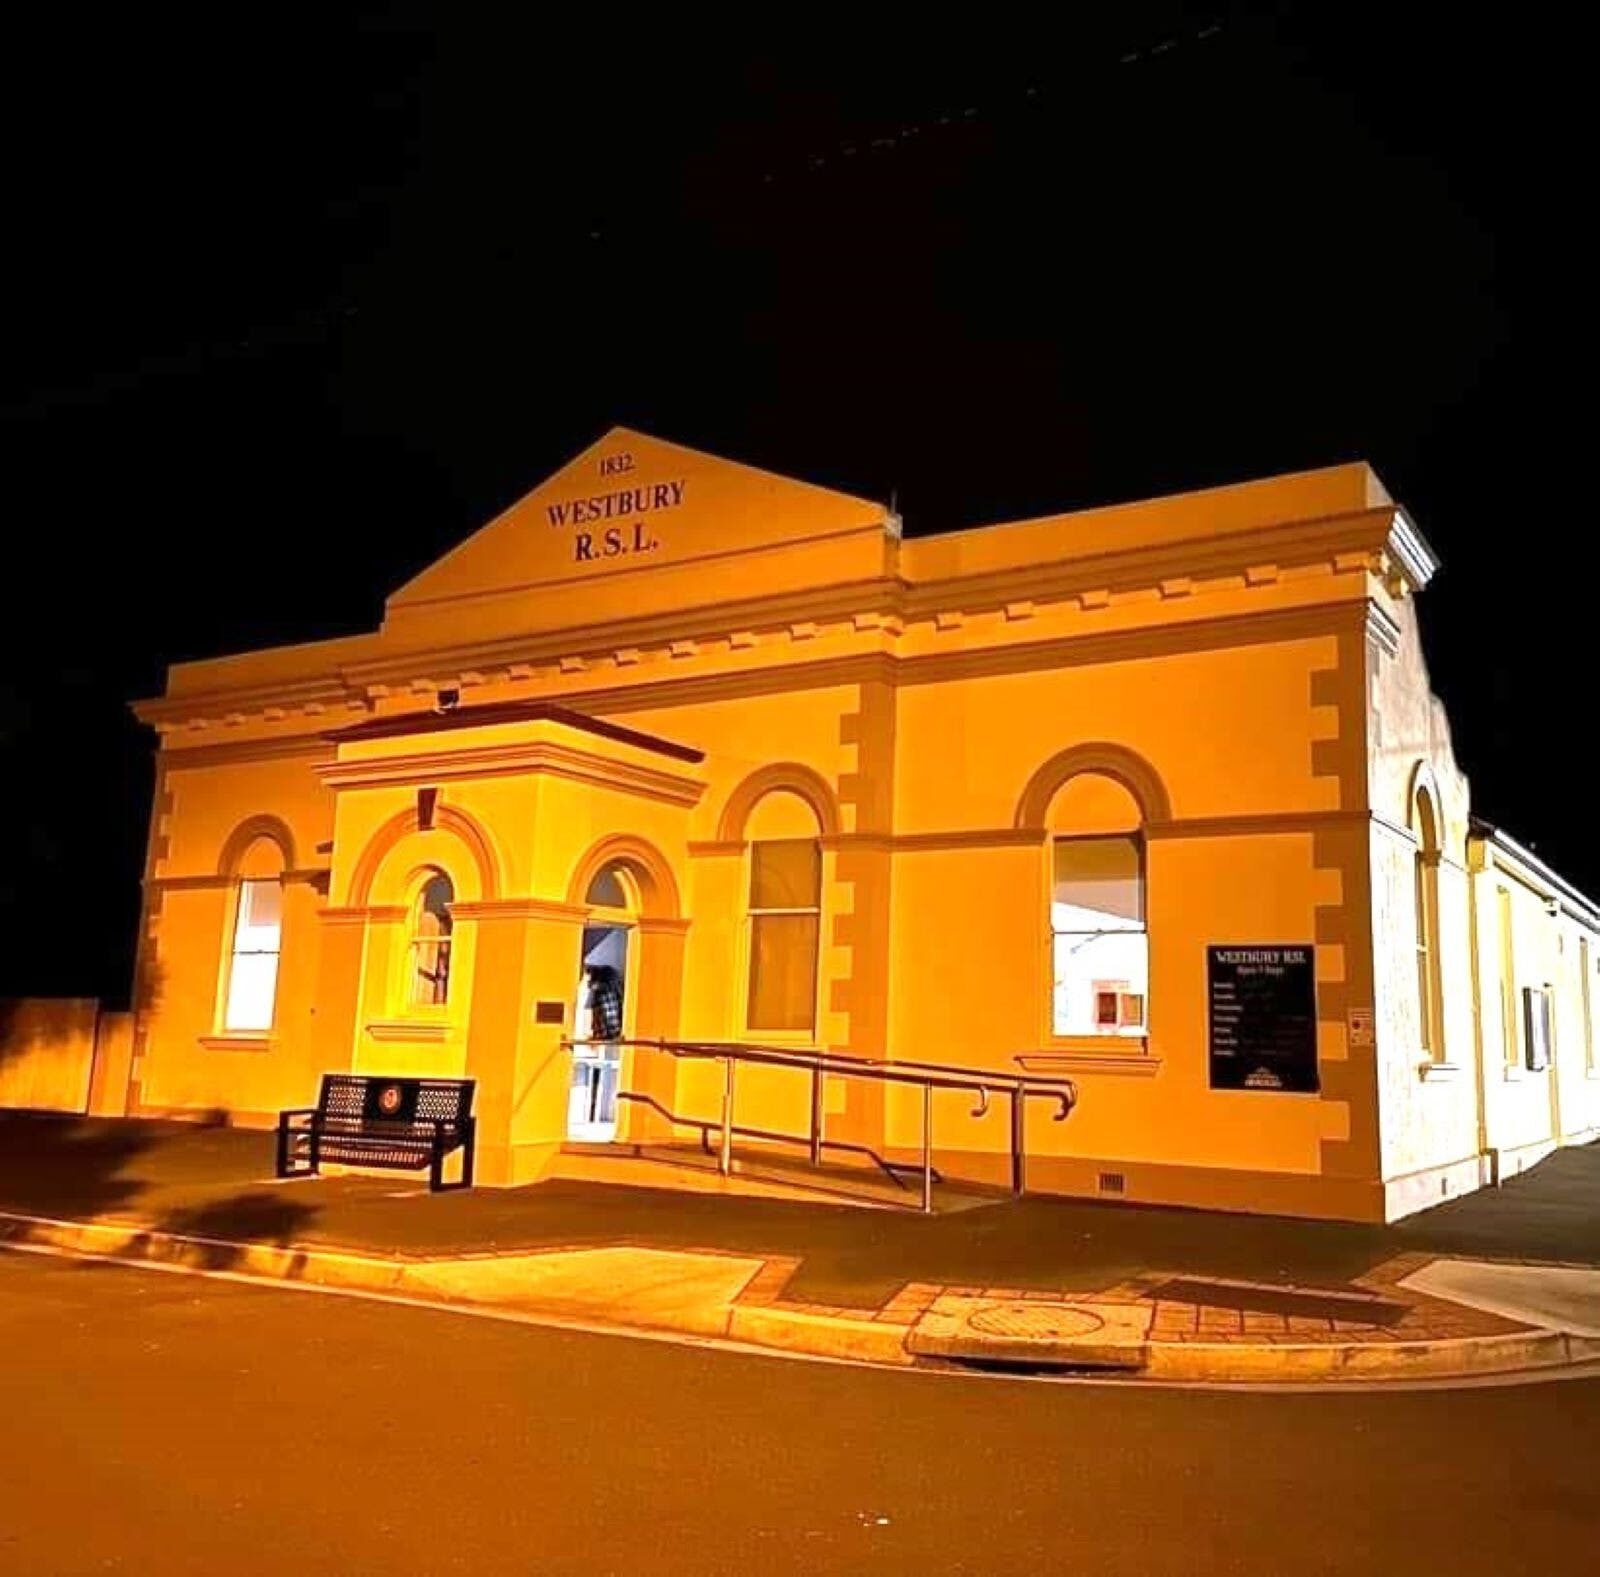 Historic Westbury RSL building front exterior at night